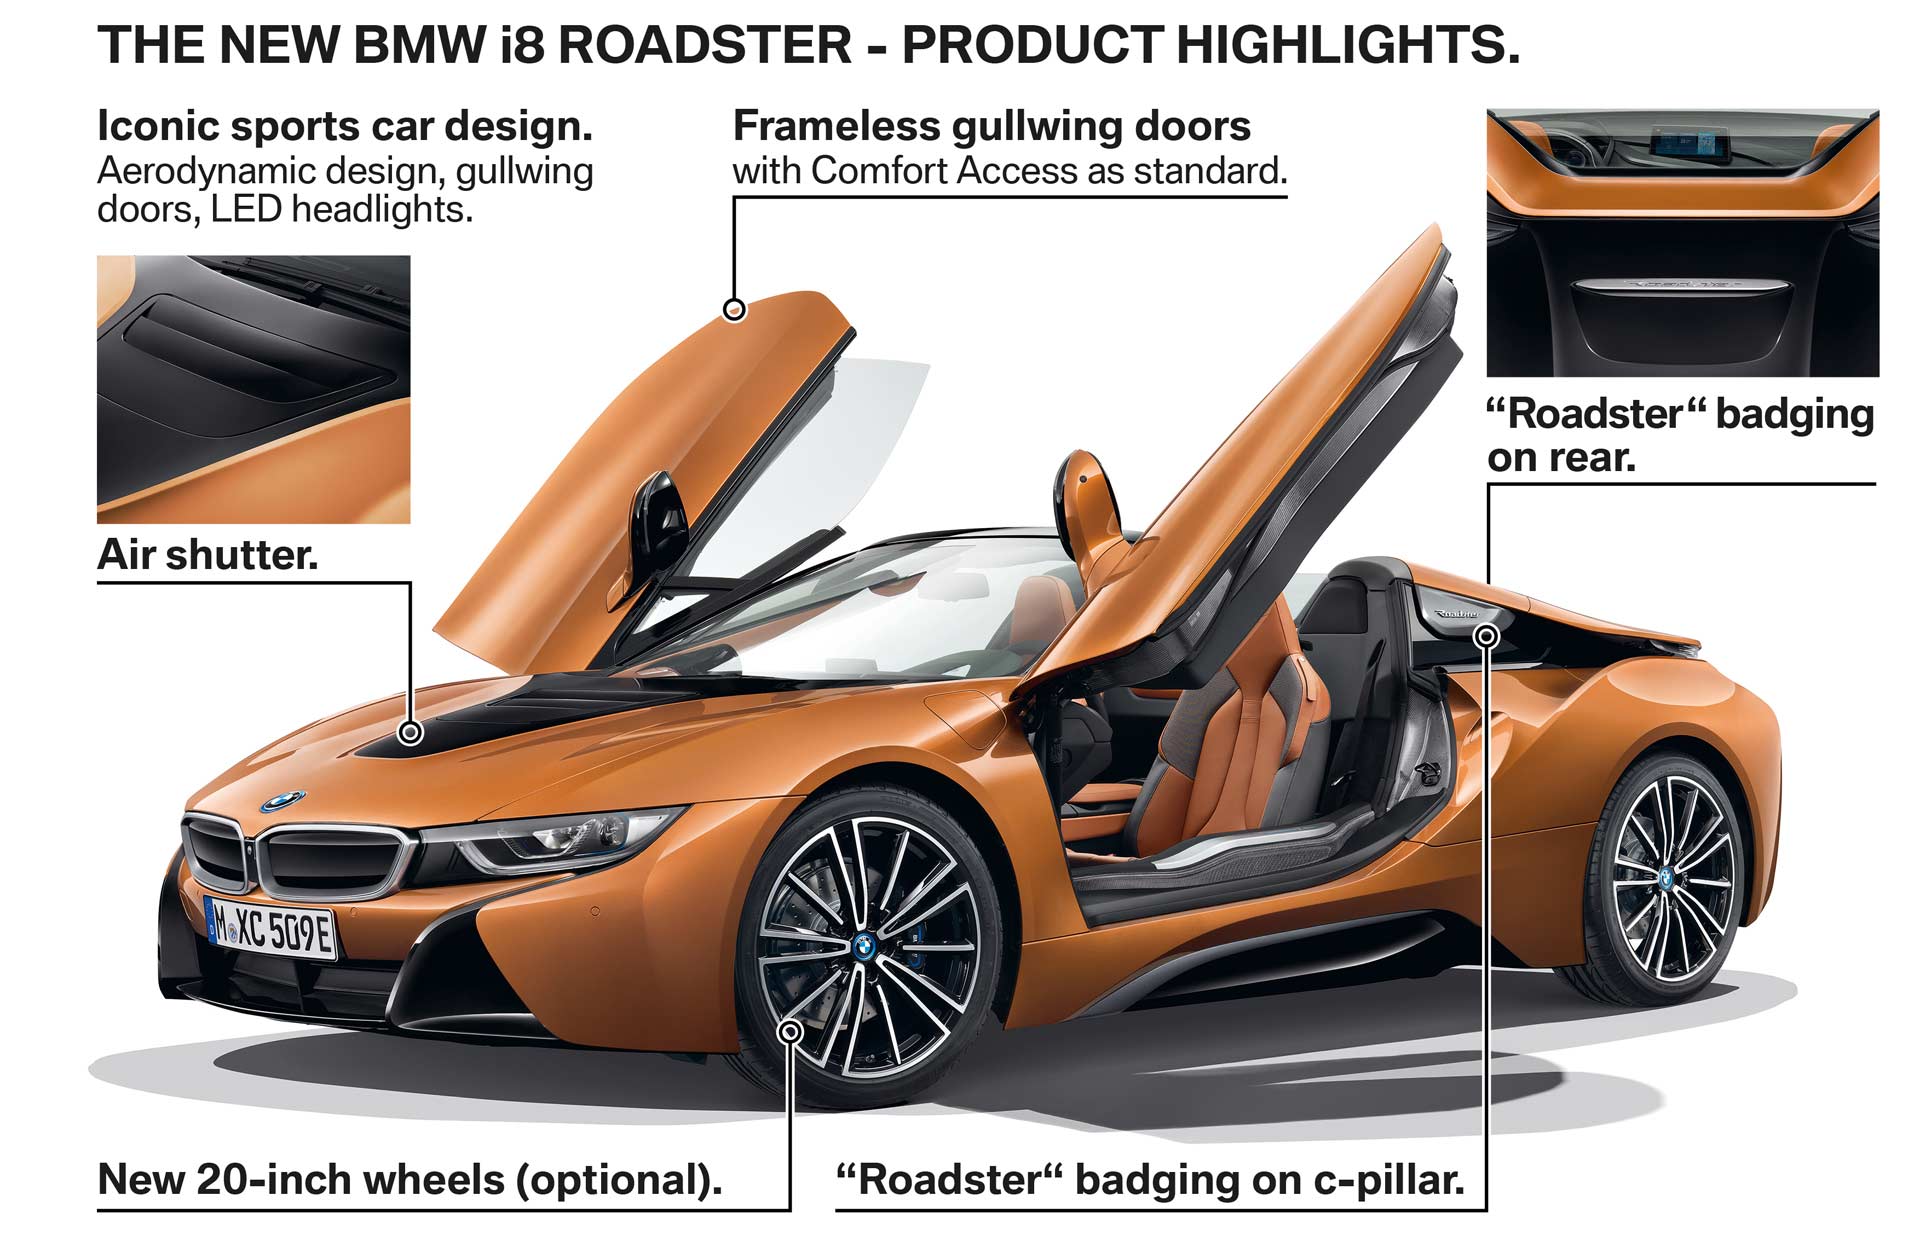 2018-BMW-i8-Roadster-product-highlights_3